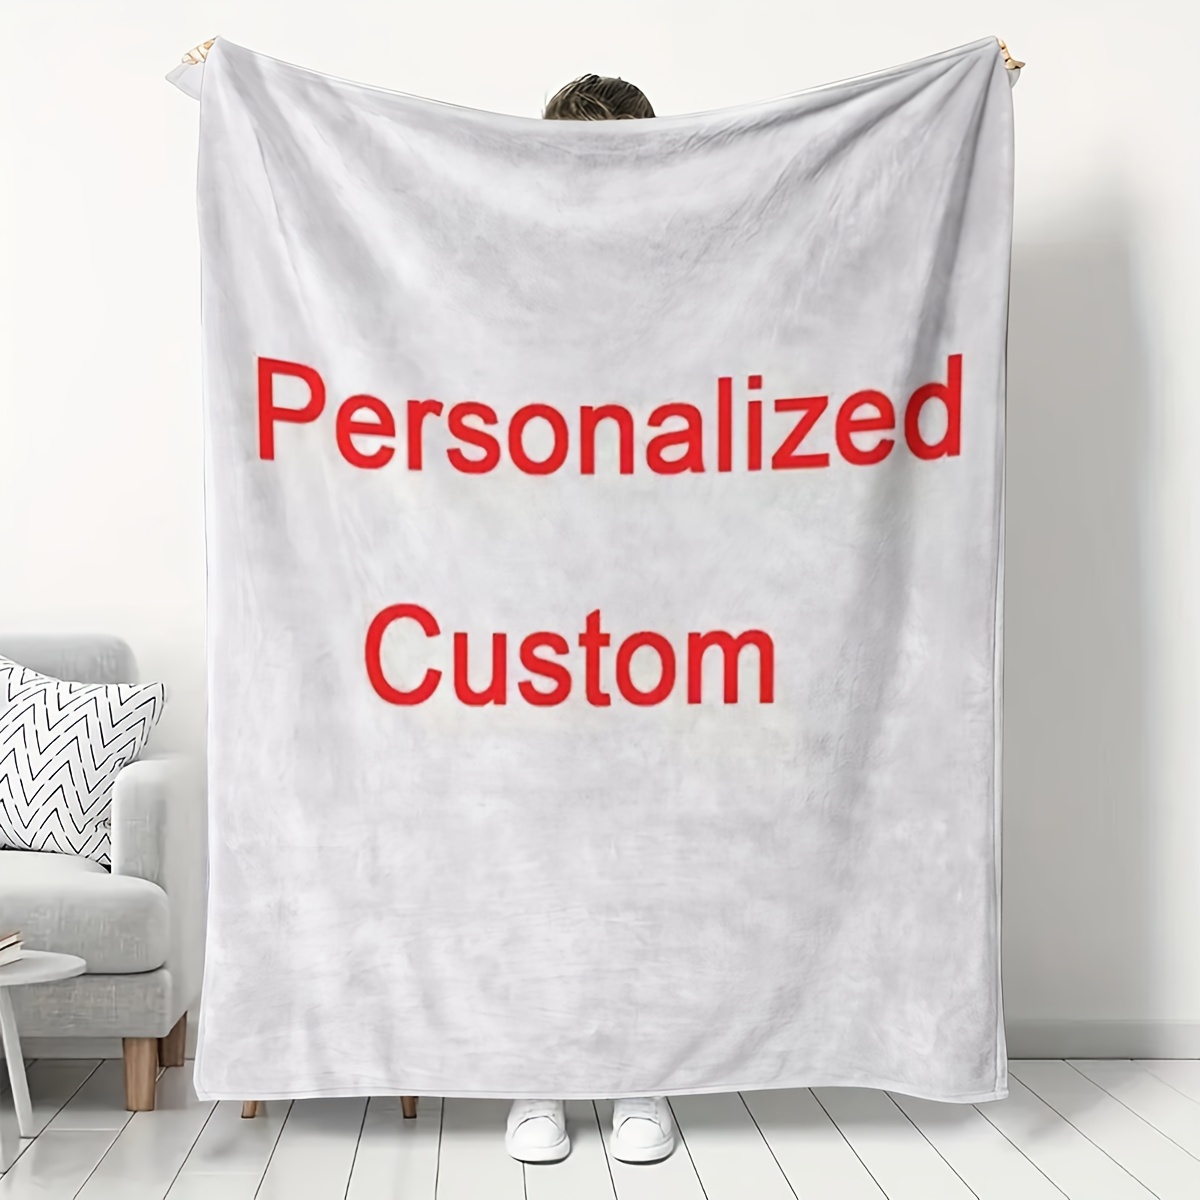 

photo-ready" Custom Photo Blanket - Personalized Throw For All Seasons, Perfect Gift For Sisters, Brothers, Best Friends & Family - Hypoallergenic Polyester, Ideal For Home, Office & Travel